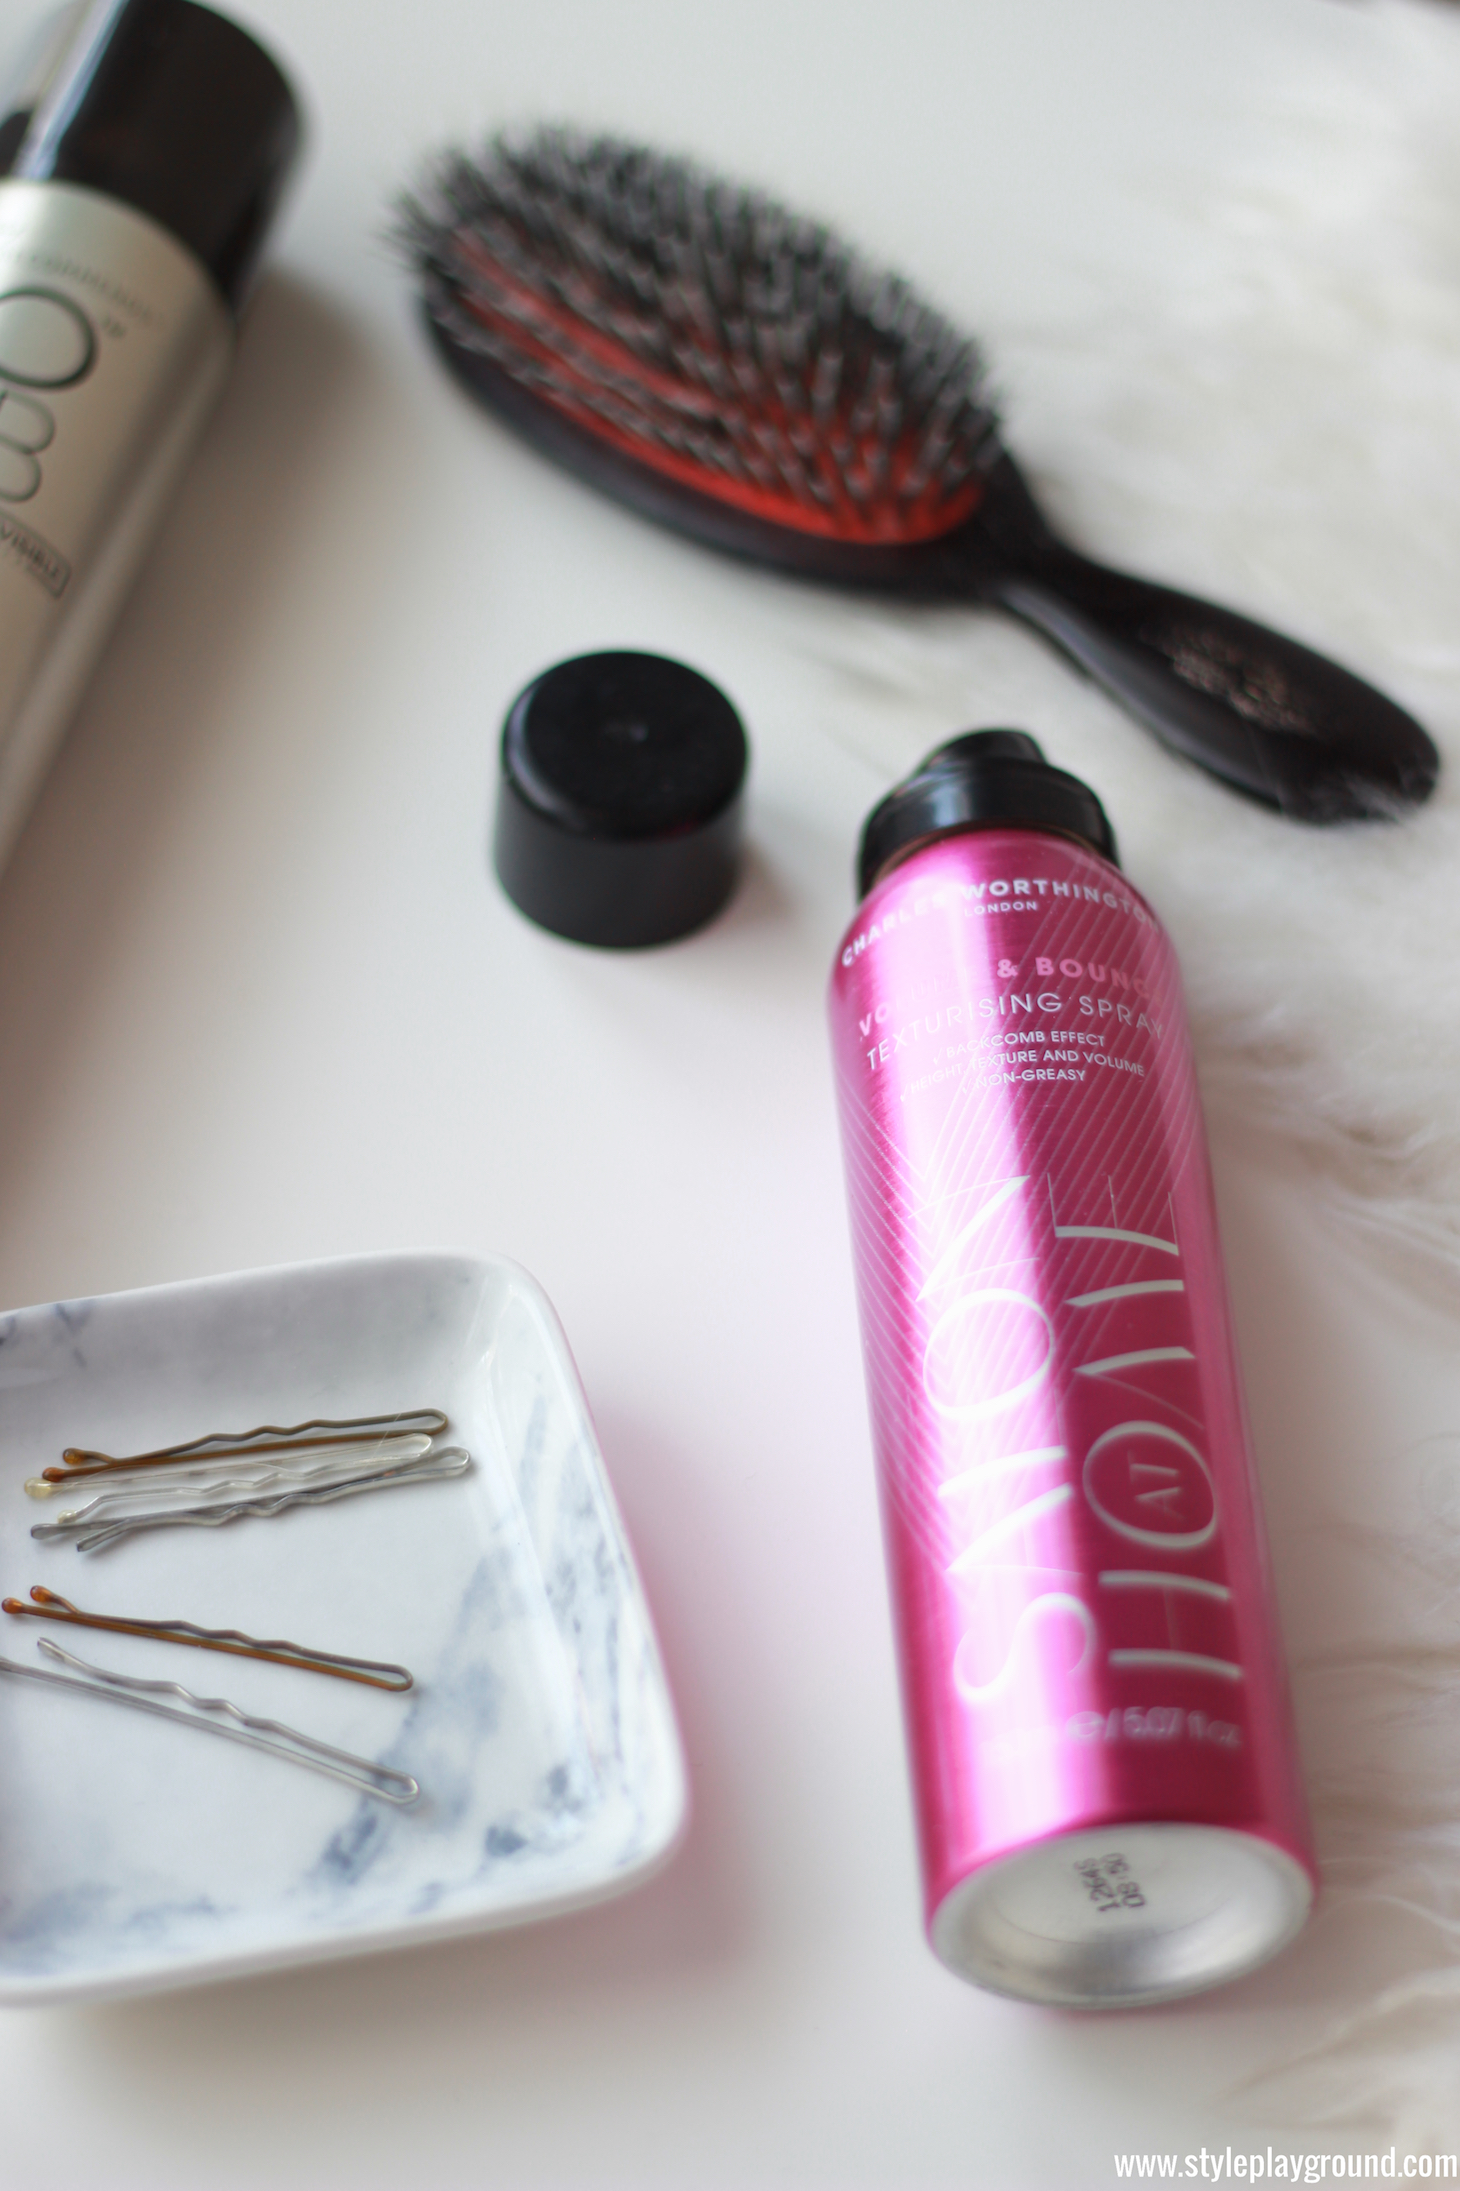 How to rock second day hair with these  amazing products